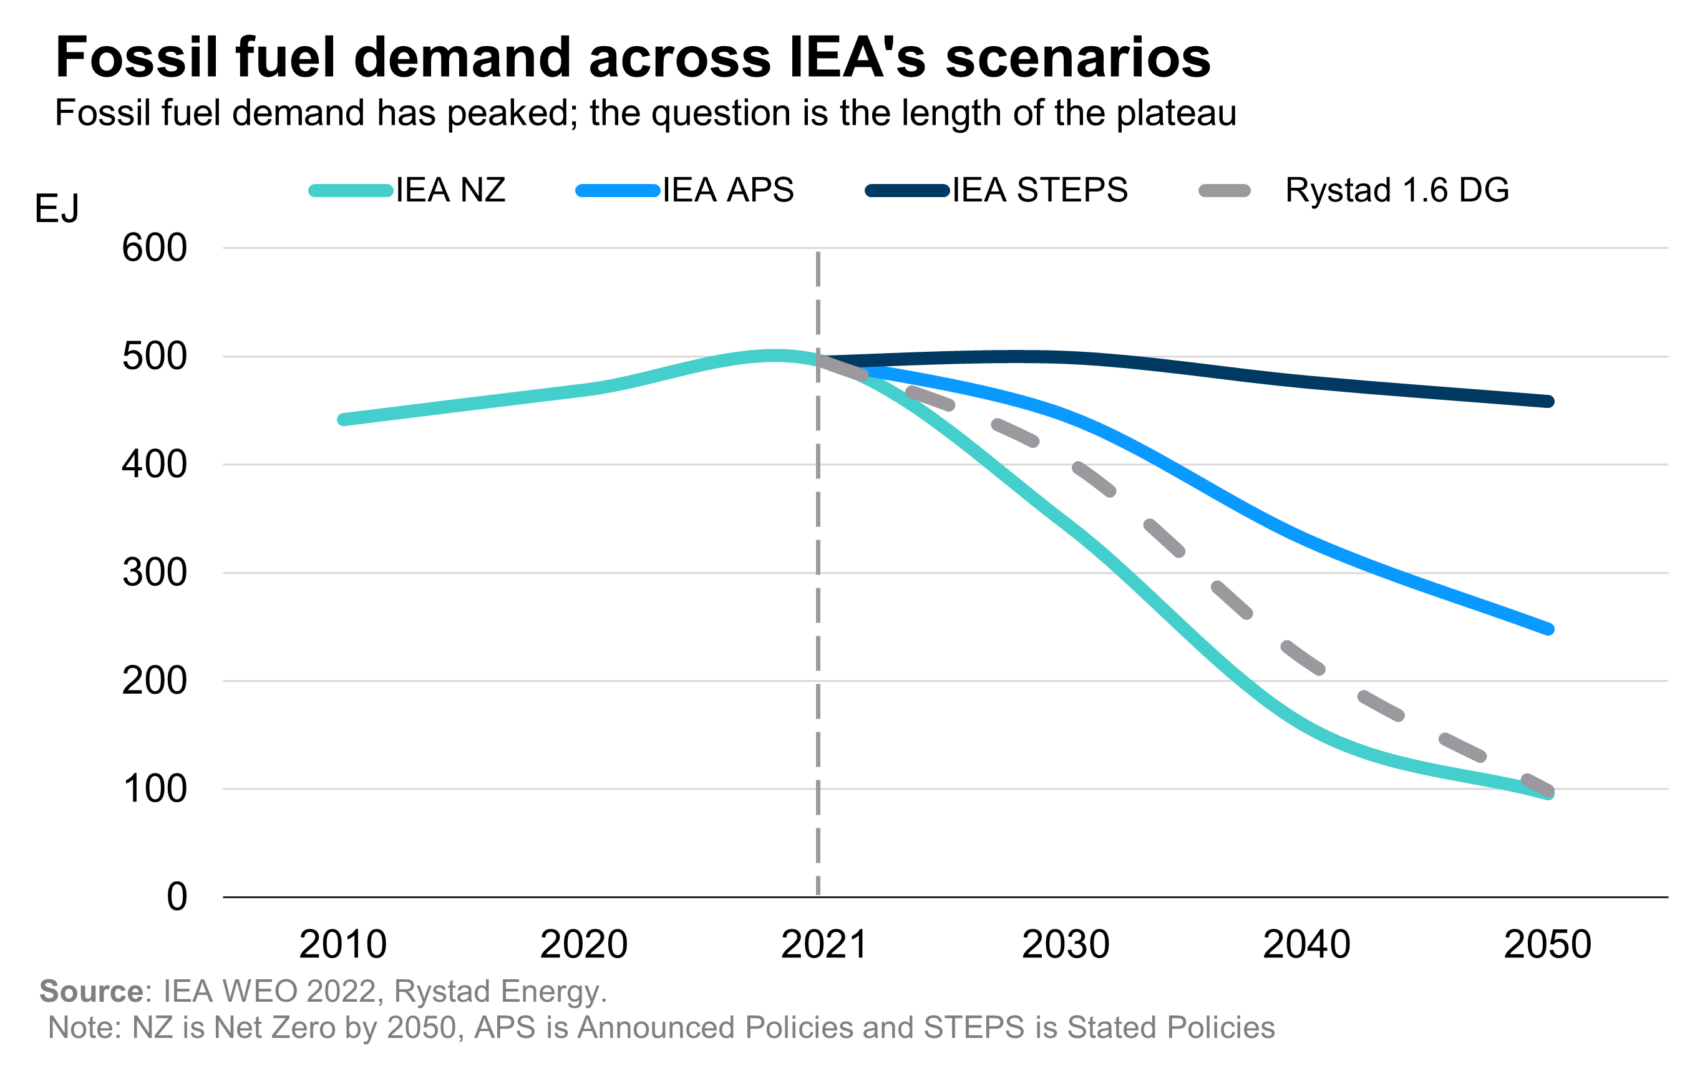 The IEA Confirms that Fossil Fuel Demand Is Peaking RMI